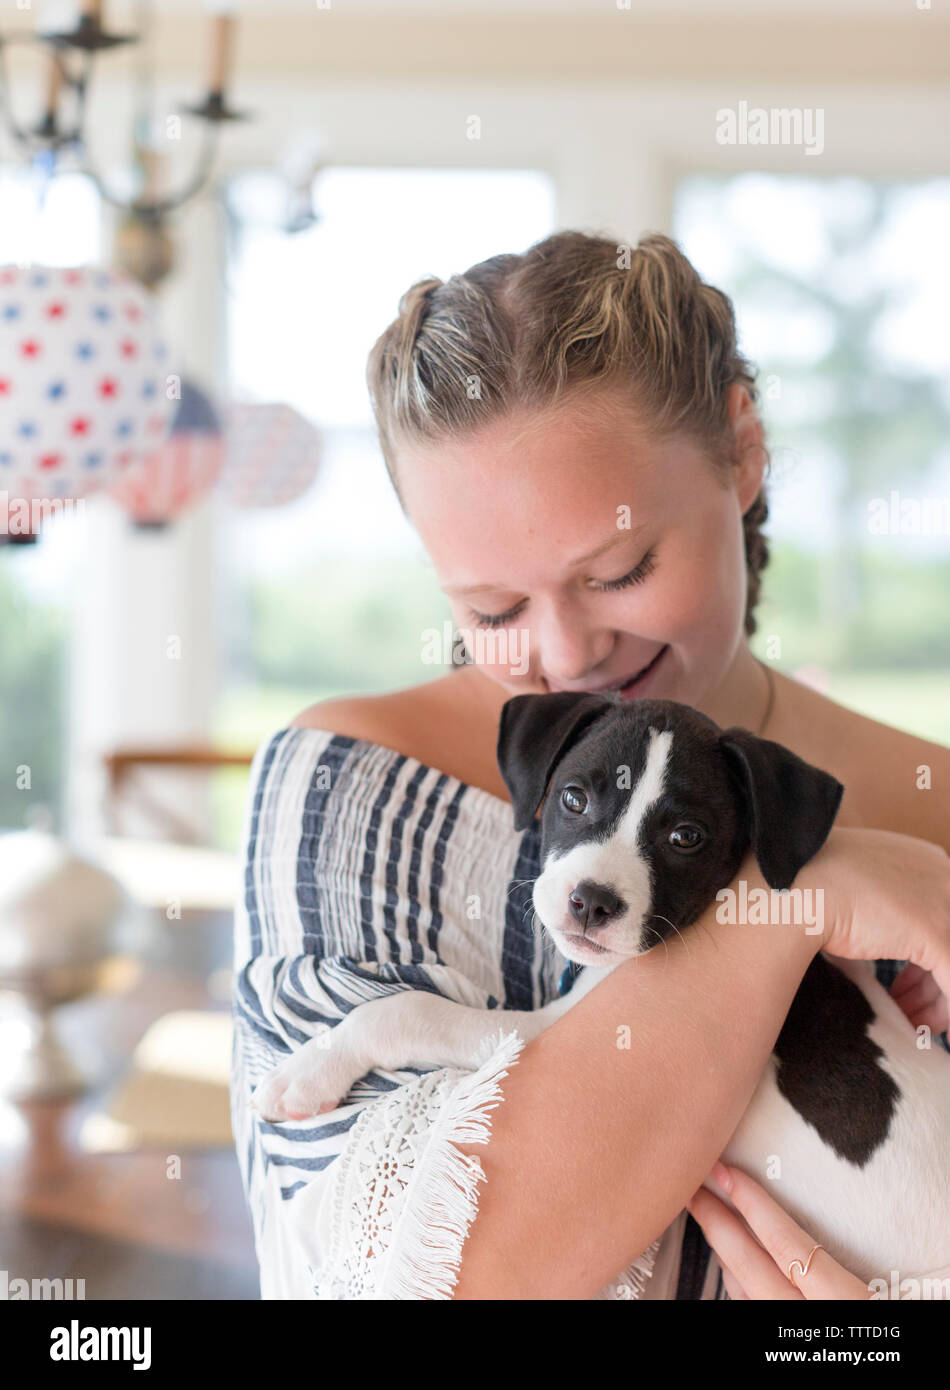 child holing a black and white puppy with floppy ears Stock Photo